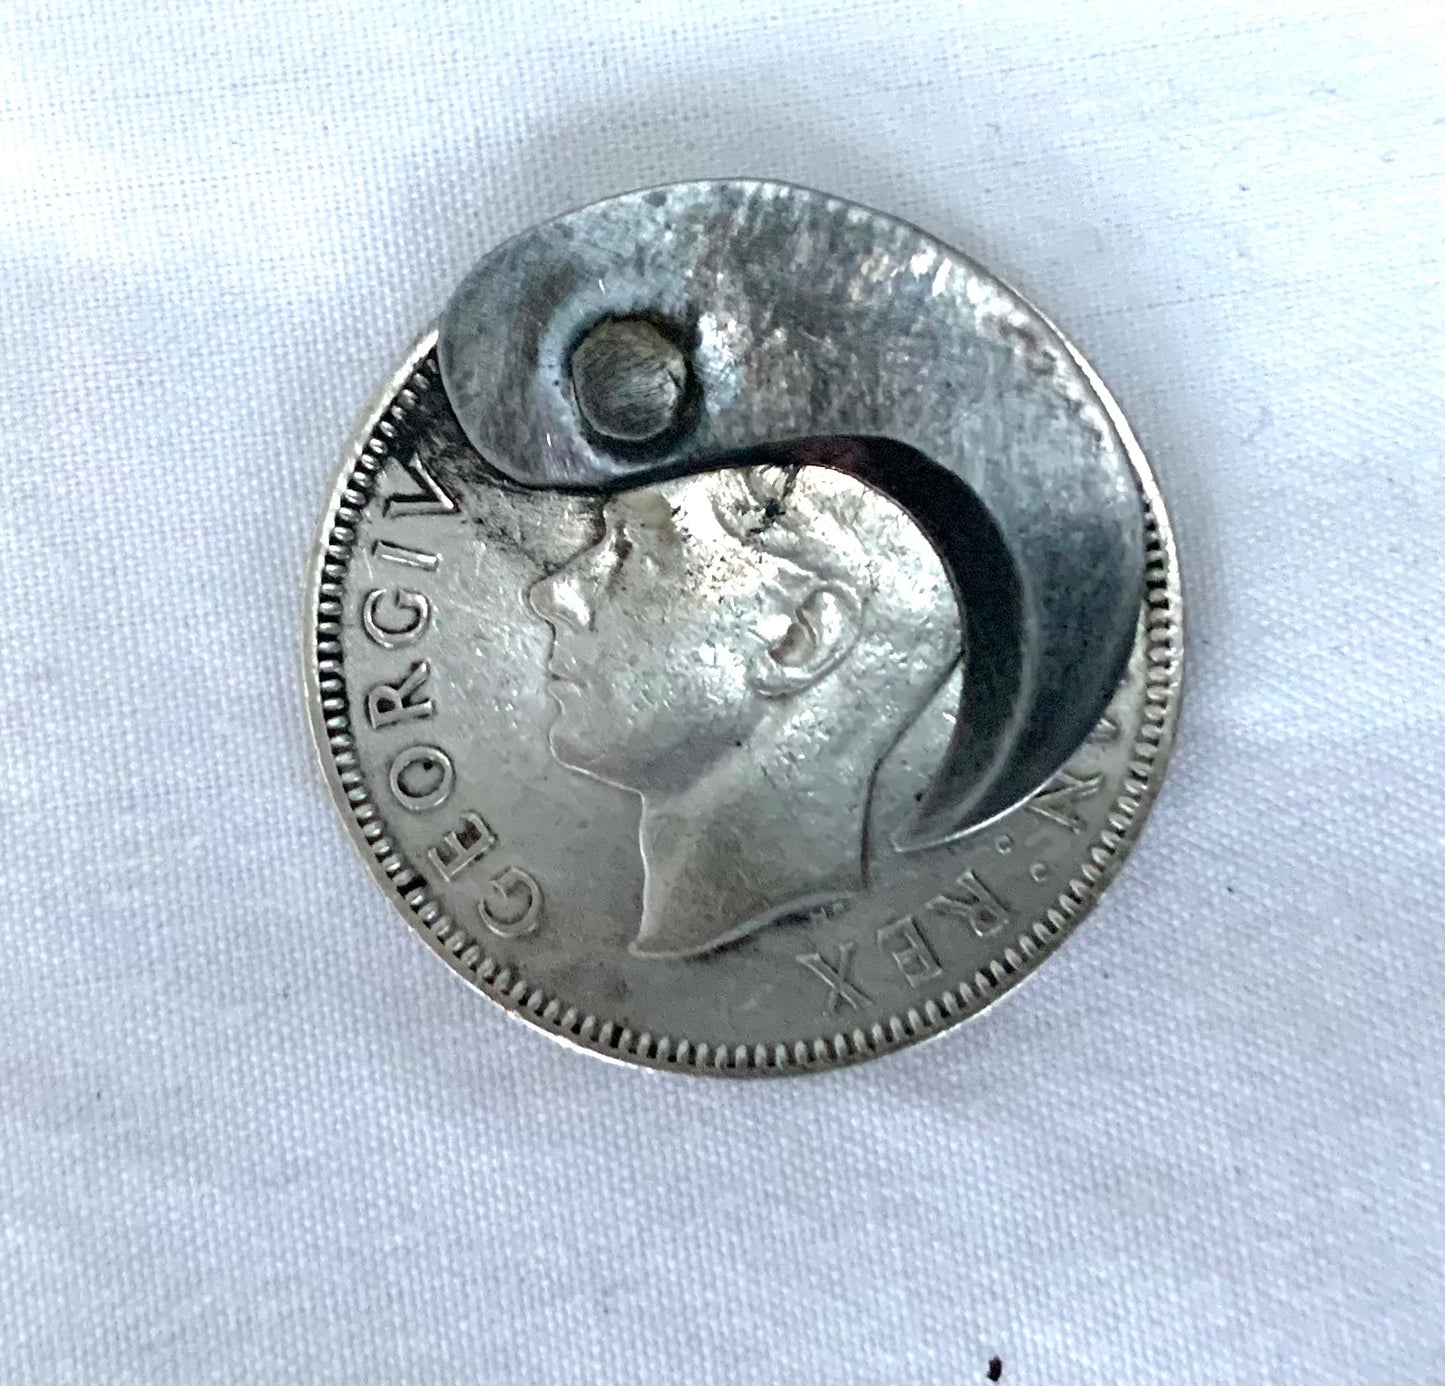 WW2 SOE British 1 Shilling Coin with Concealed Blade Dated 1940.